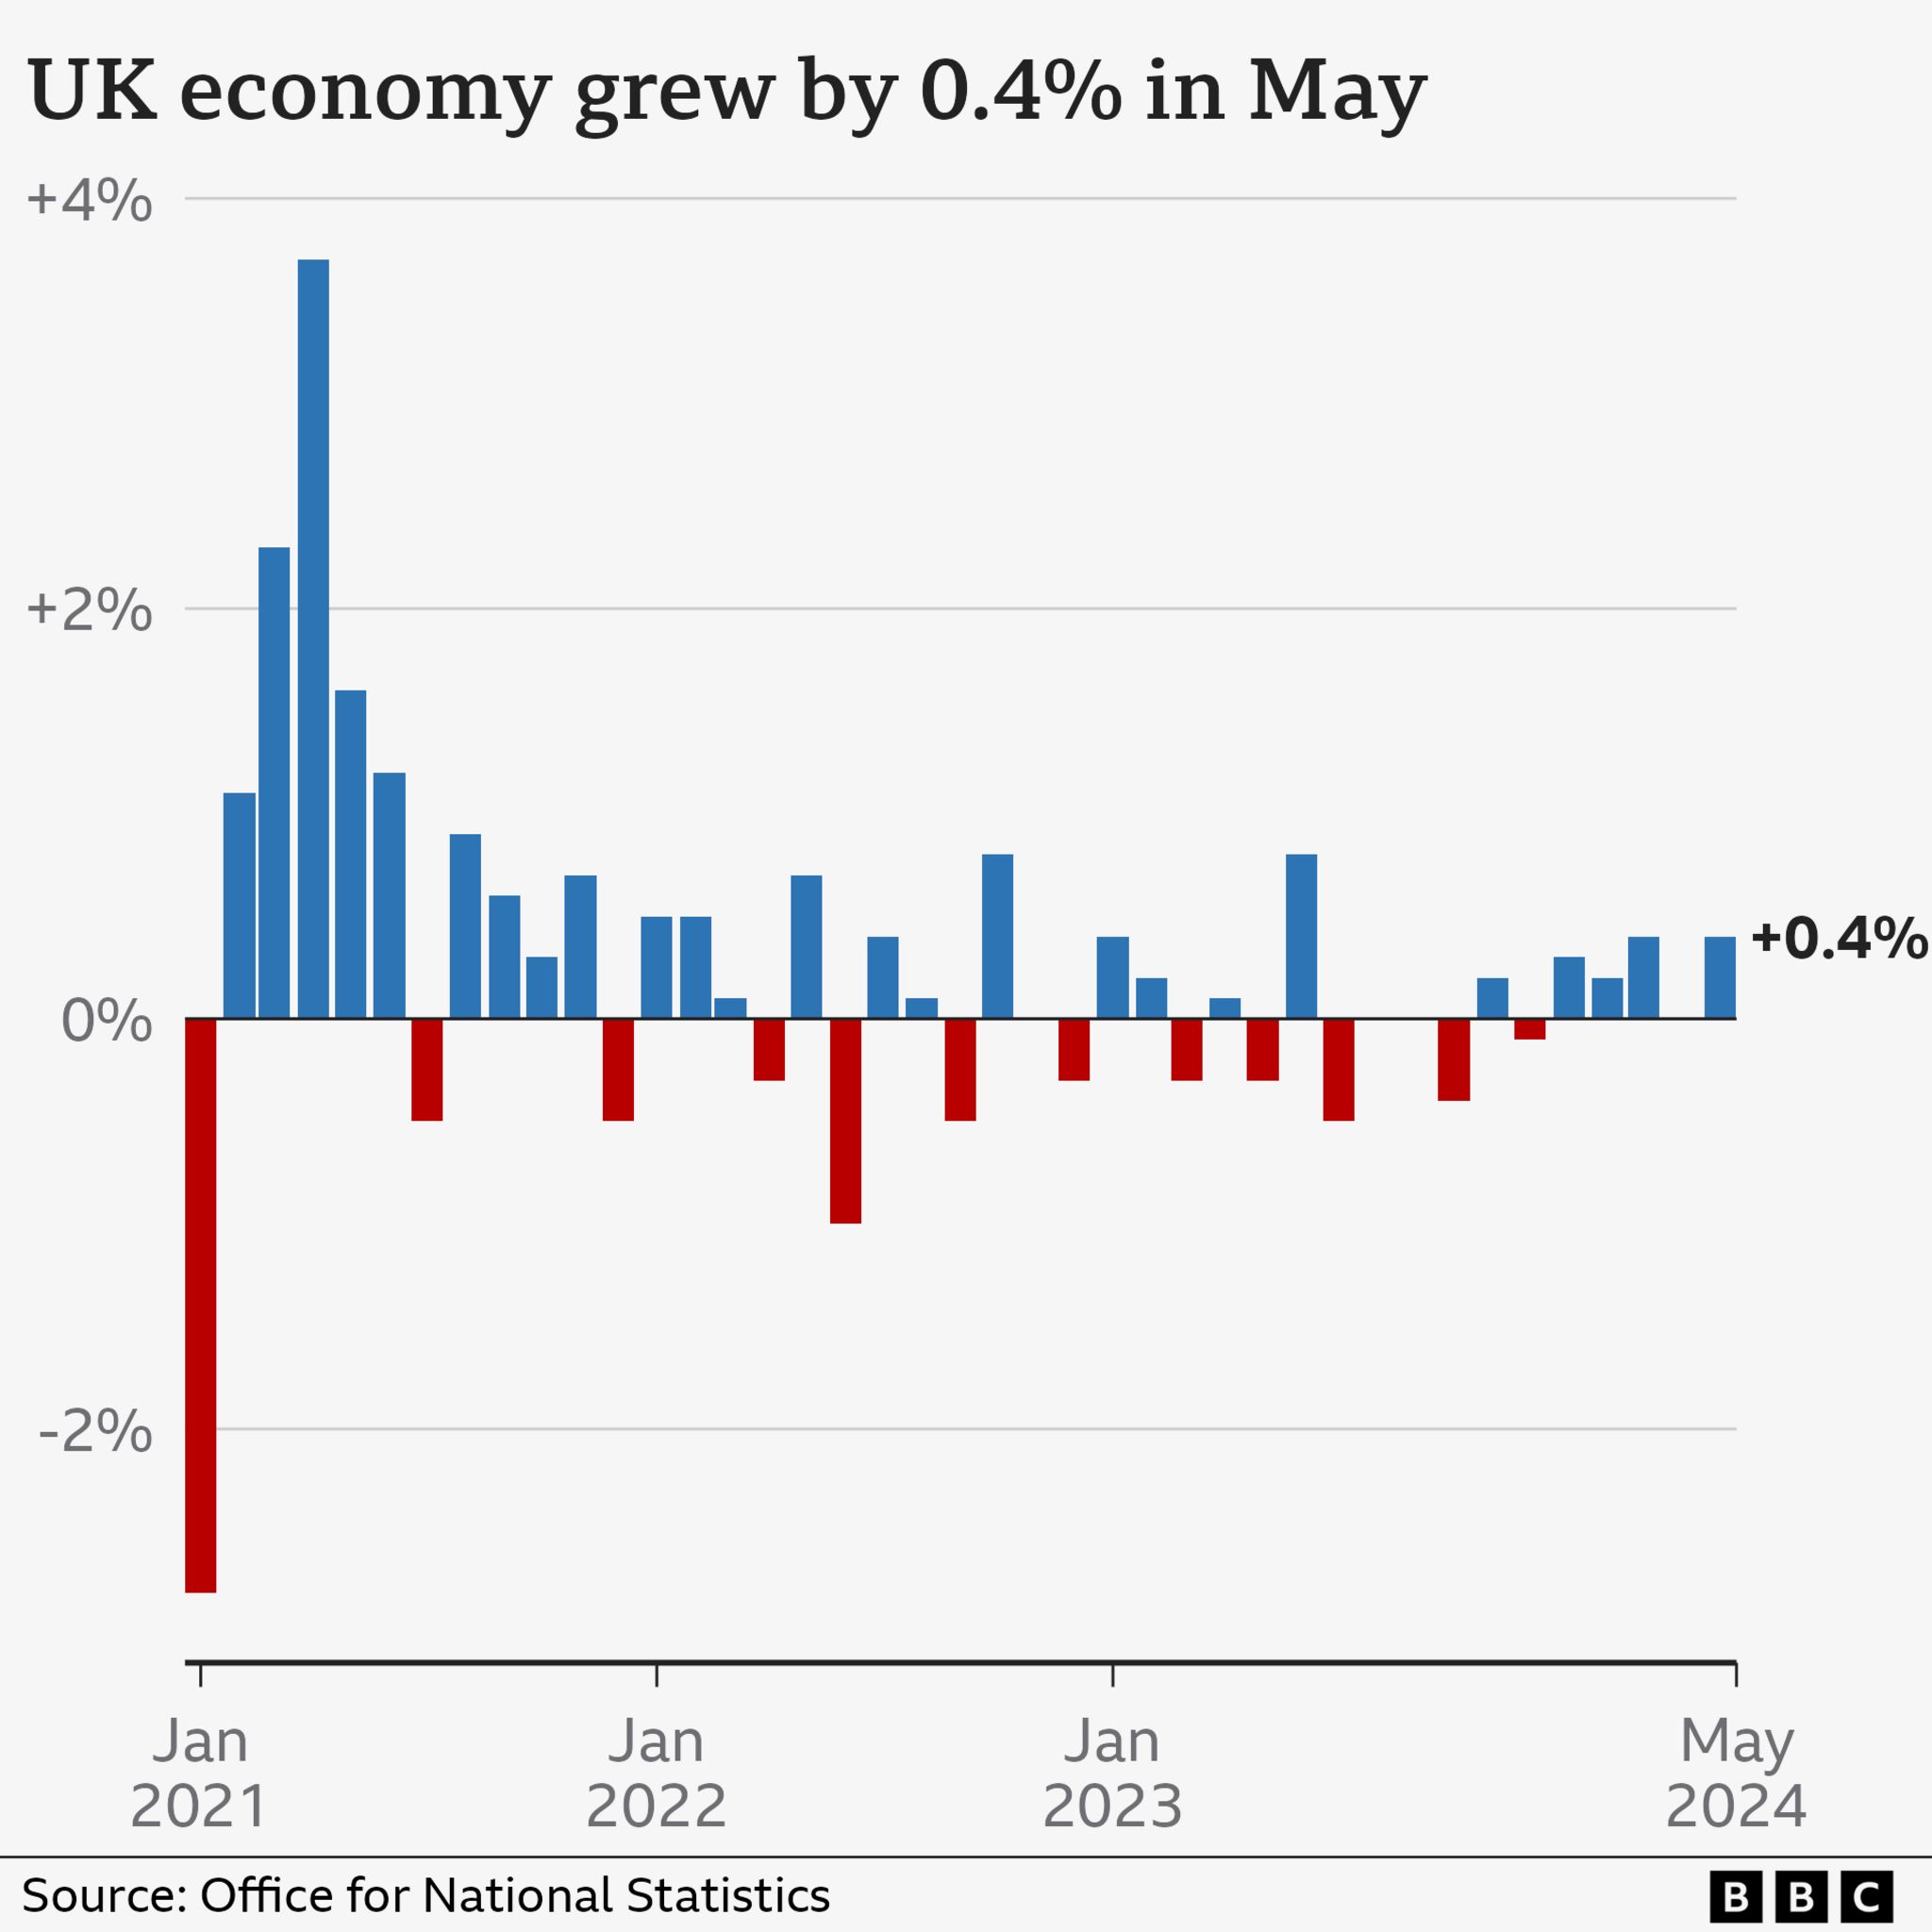 Bar chart showing monthly changes in UK GDP growth with the latest being 0.4% in May 2024